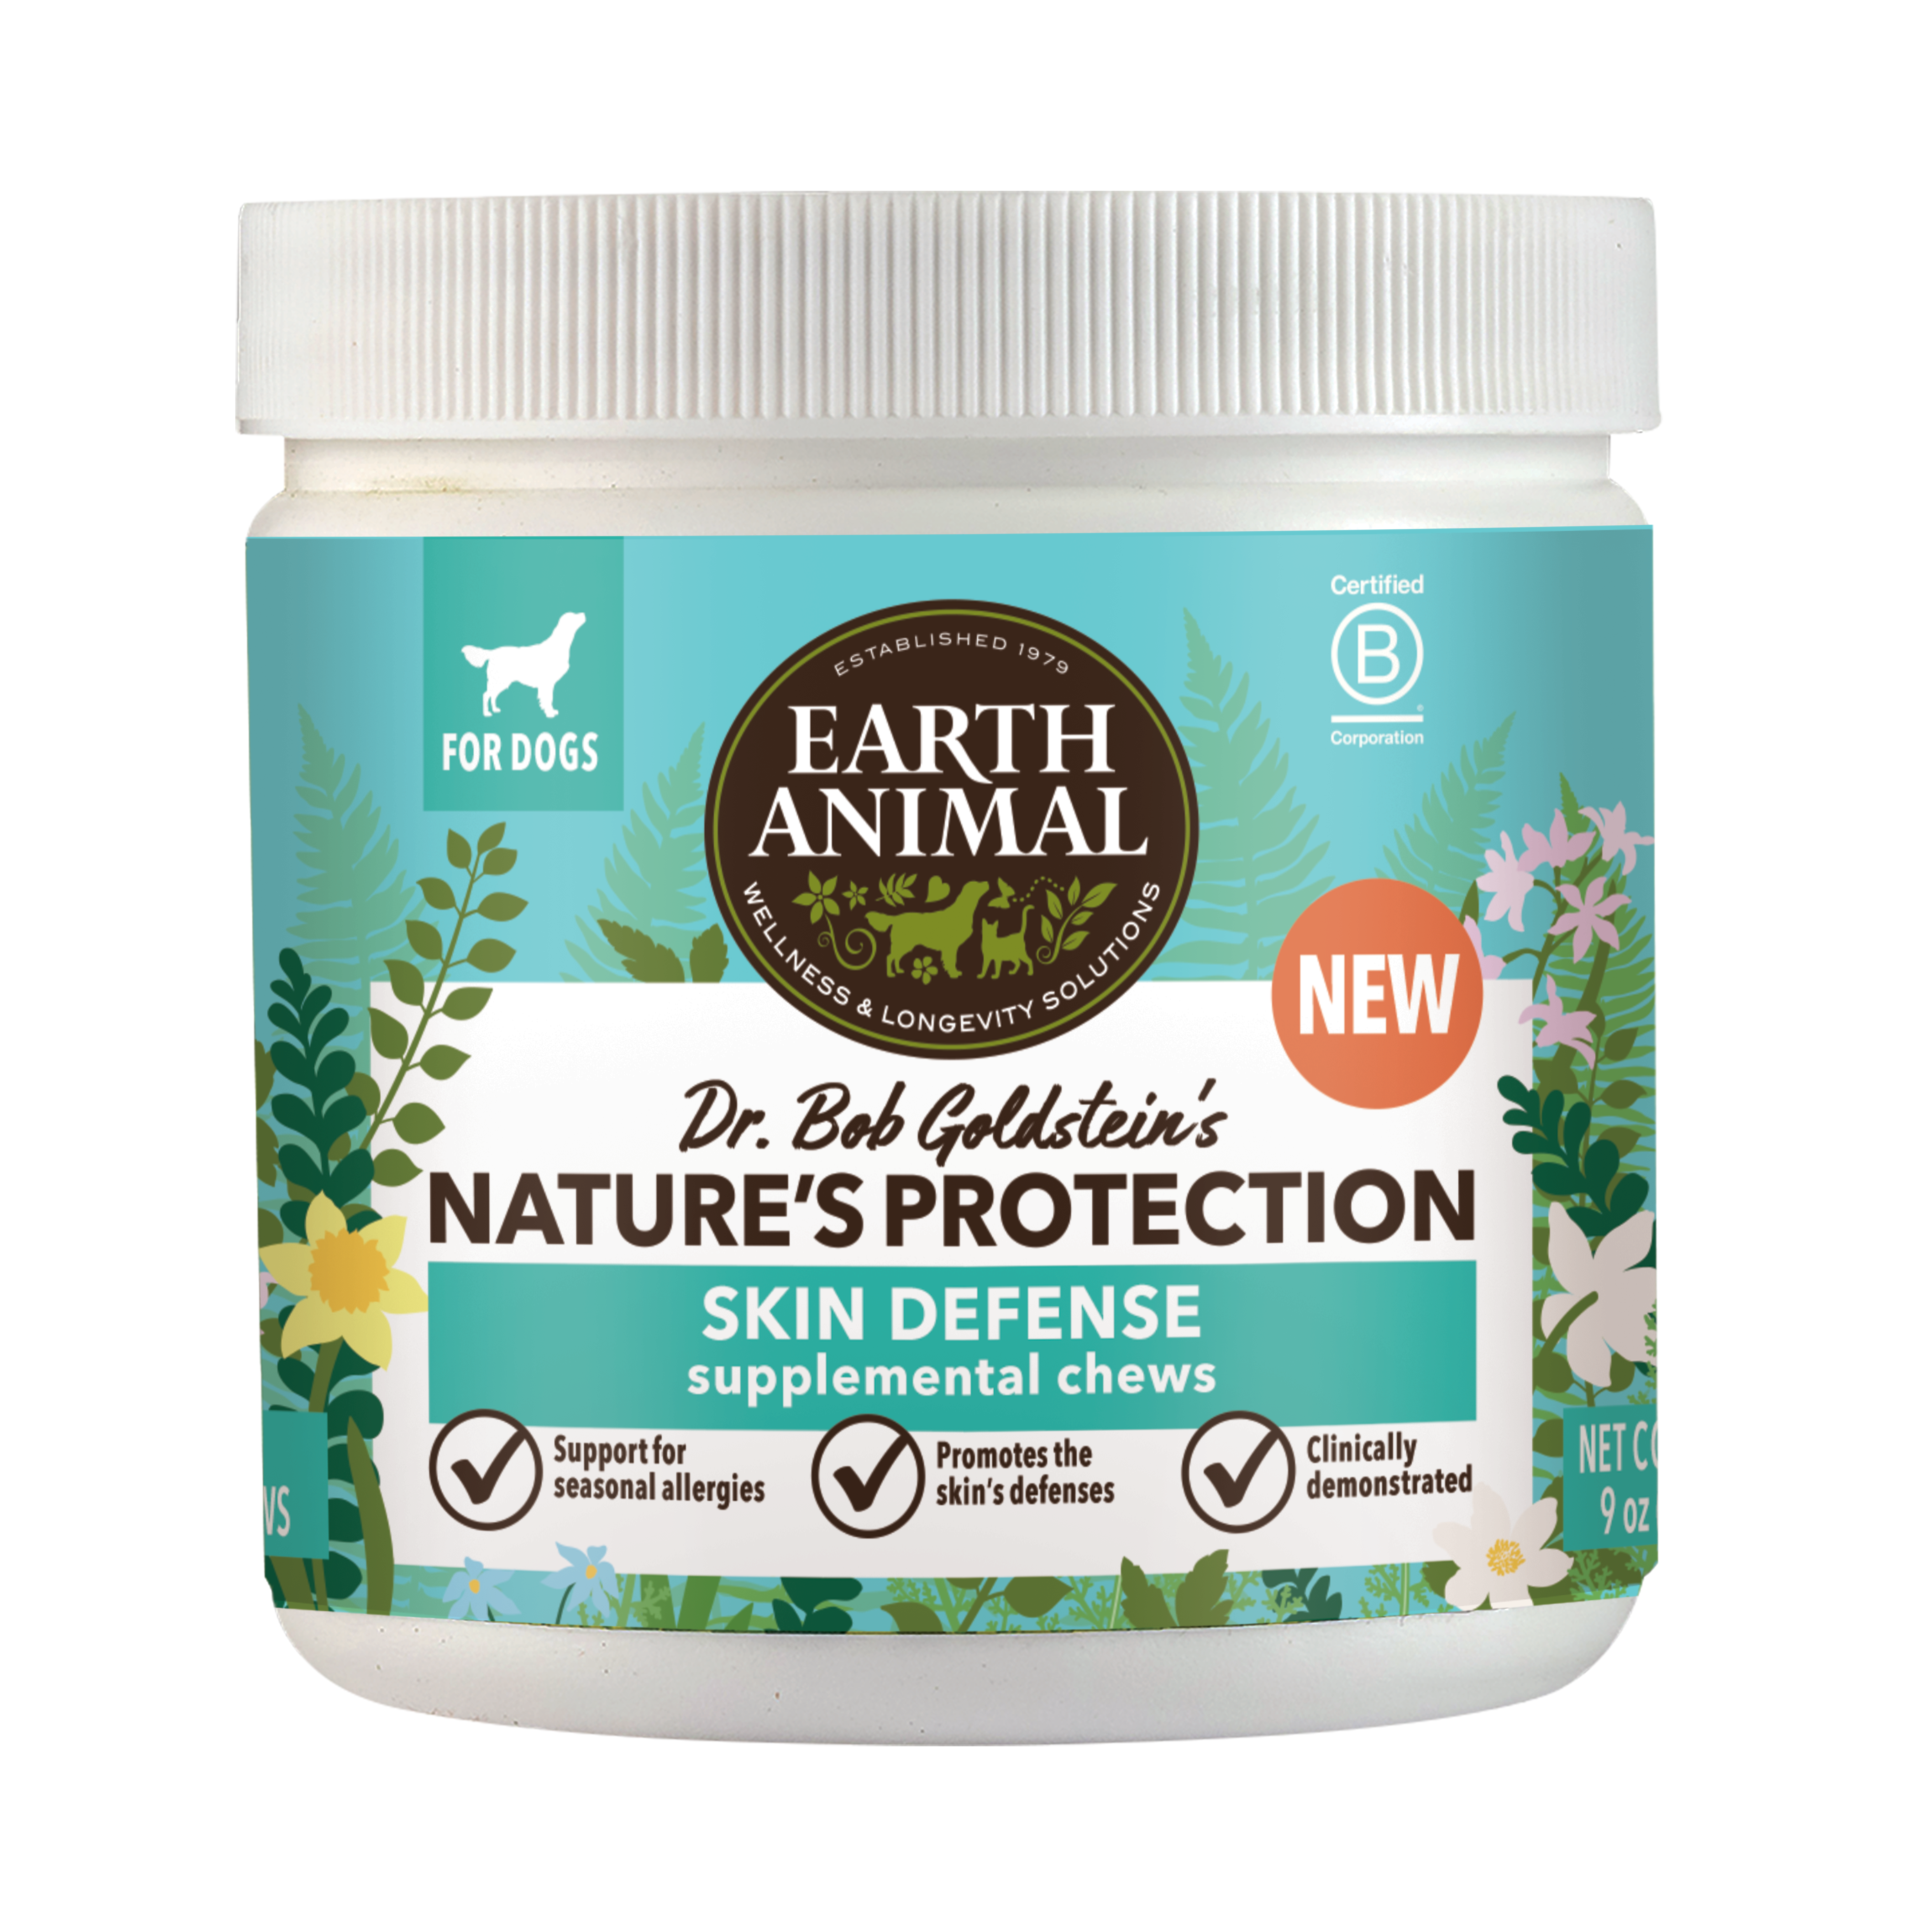 Earth Animal Nature's Protection Skin Defense supplemental chews